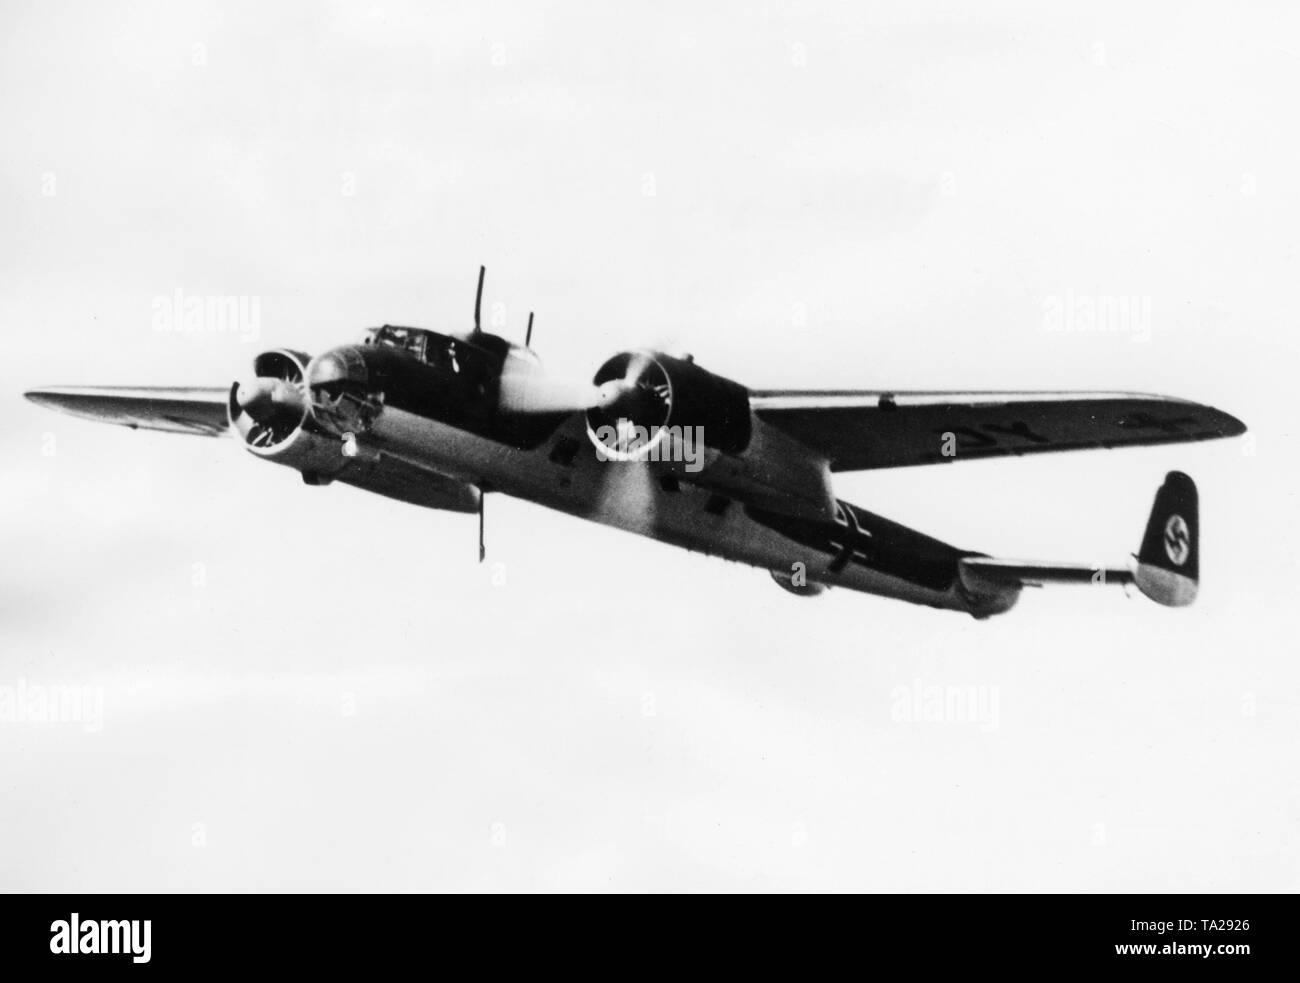 Dornier Do 17 Ausf. M combat aircraft in flight. Undated photo, probably in the 1930s. Stock Photo